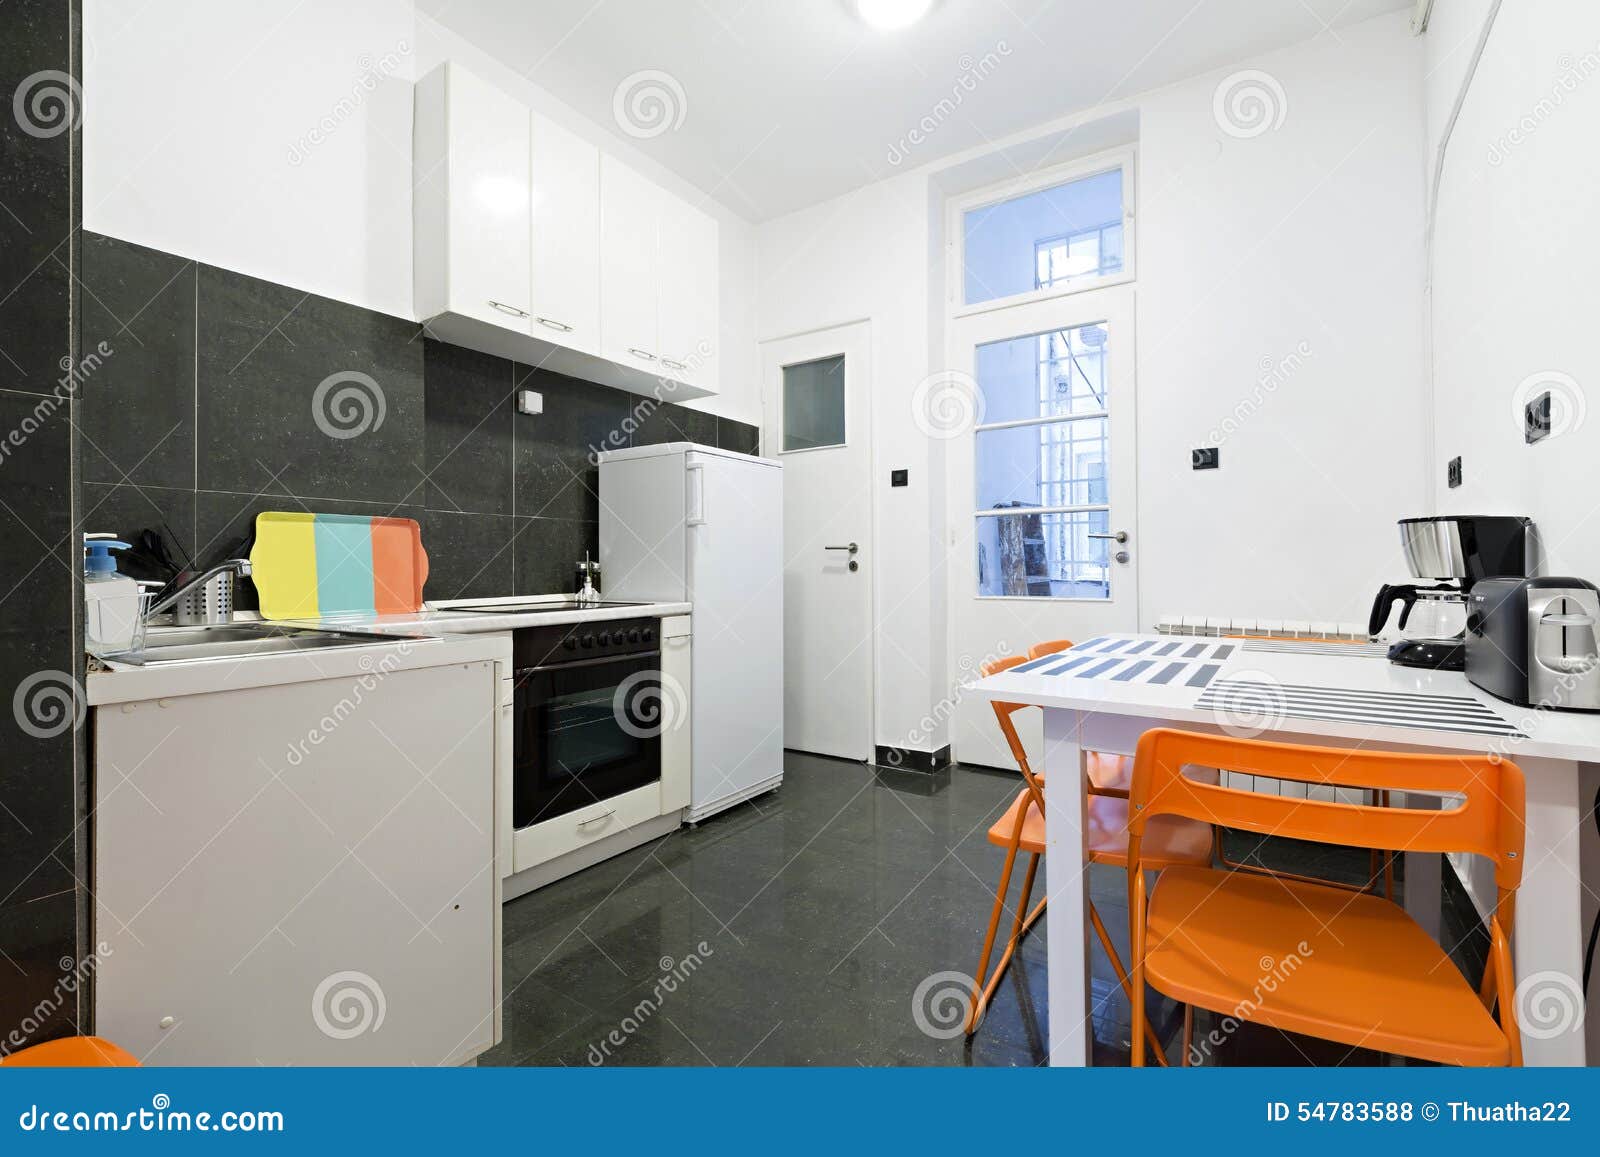 kitchen and dining room in small apartment